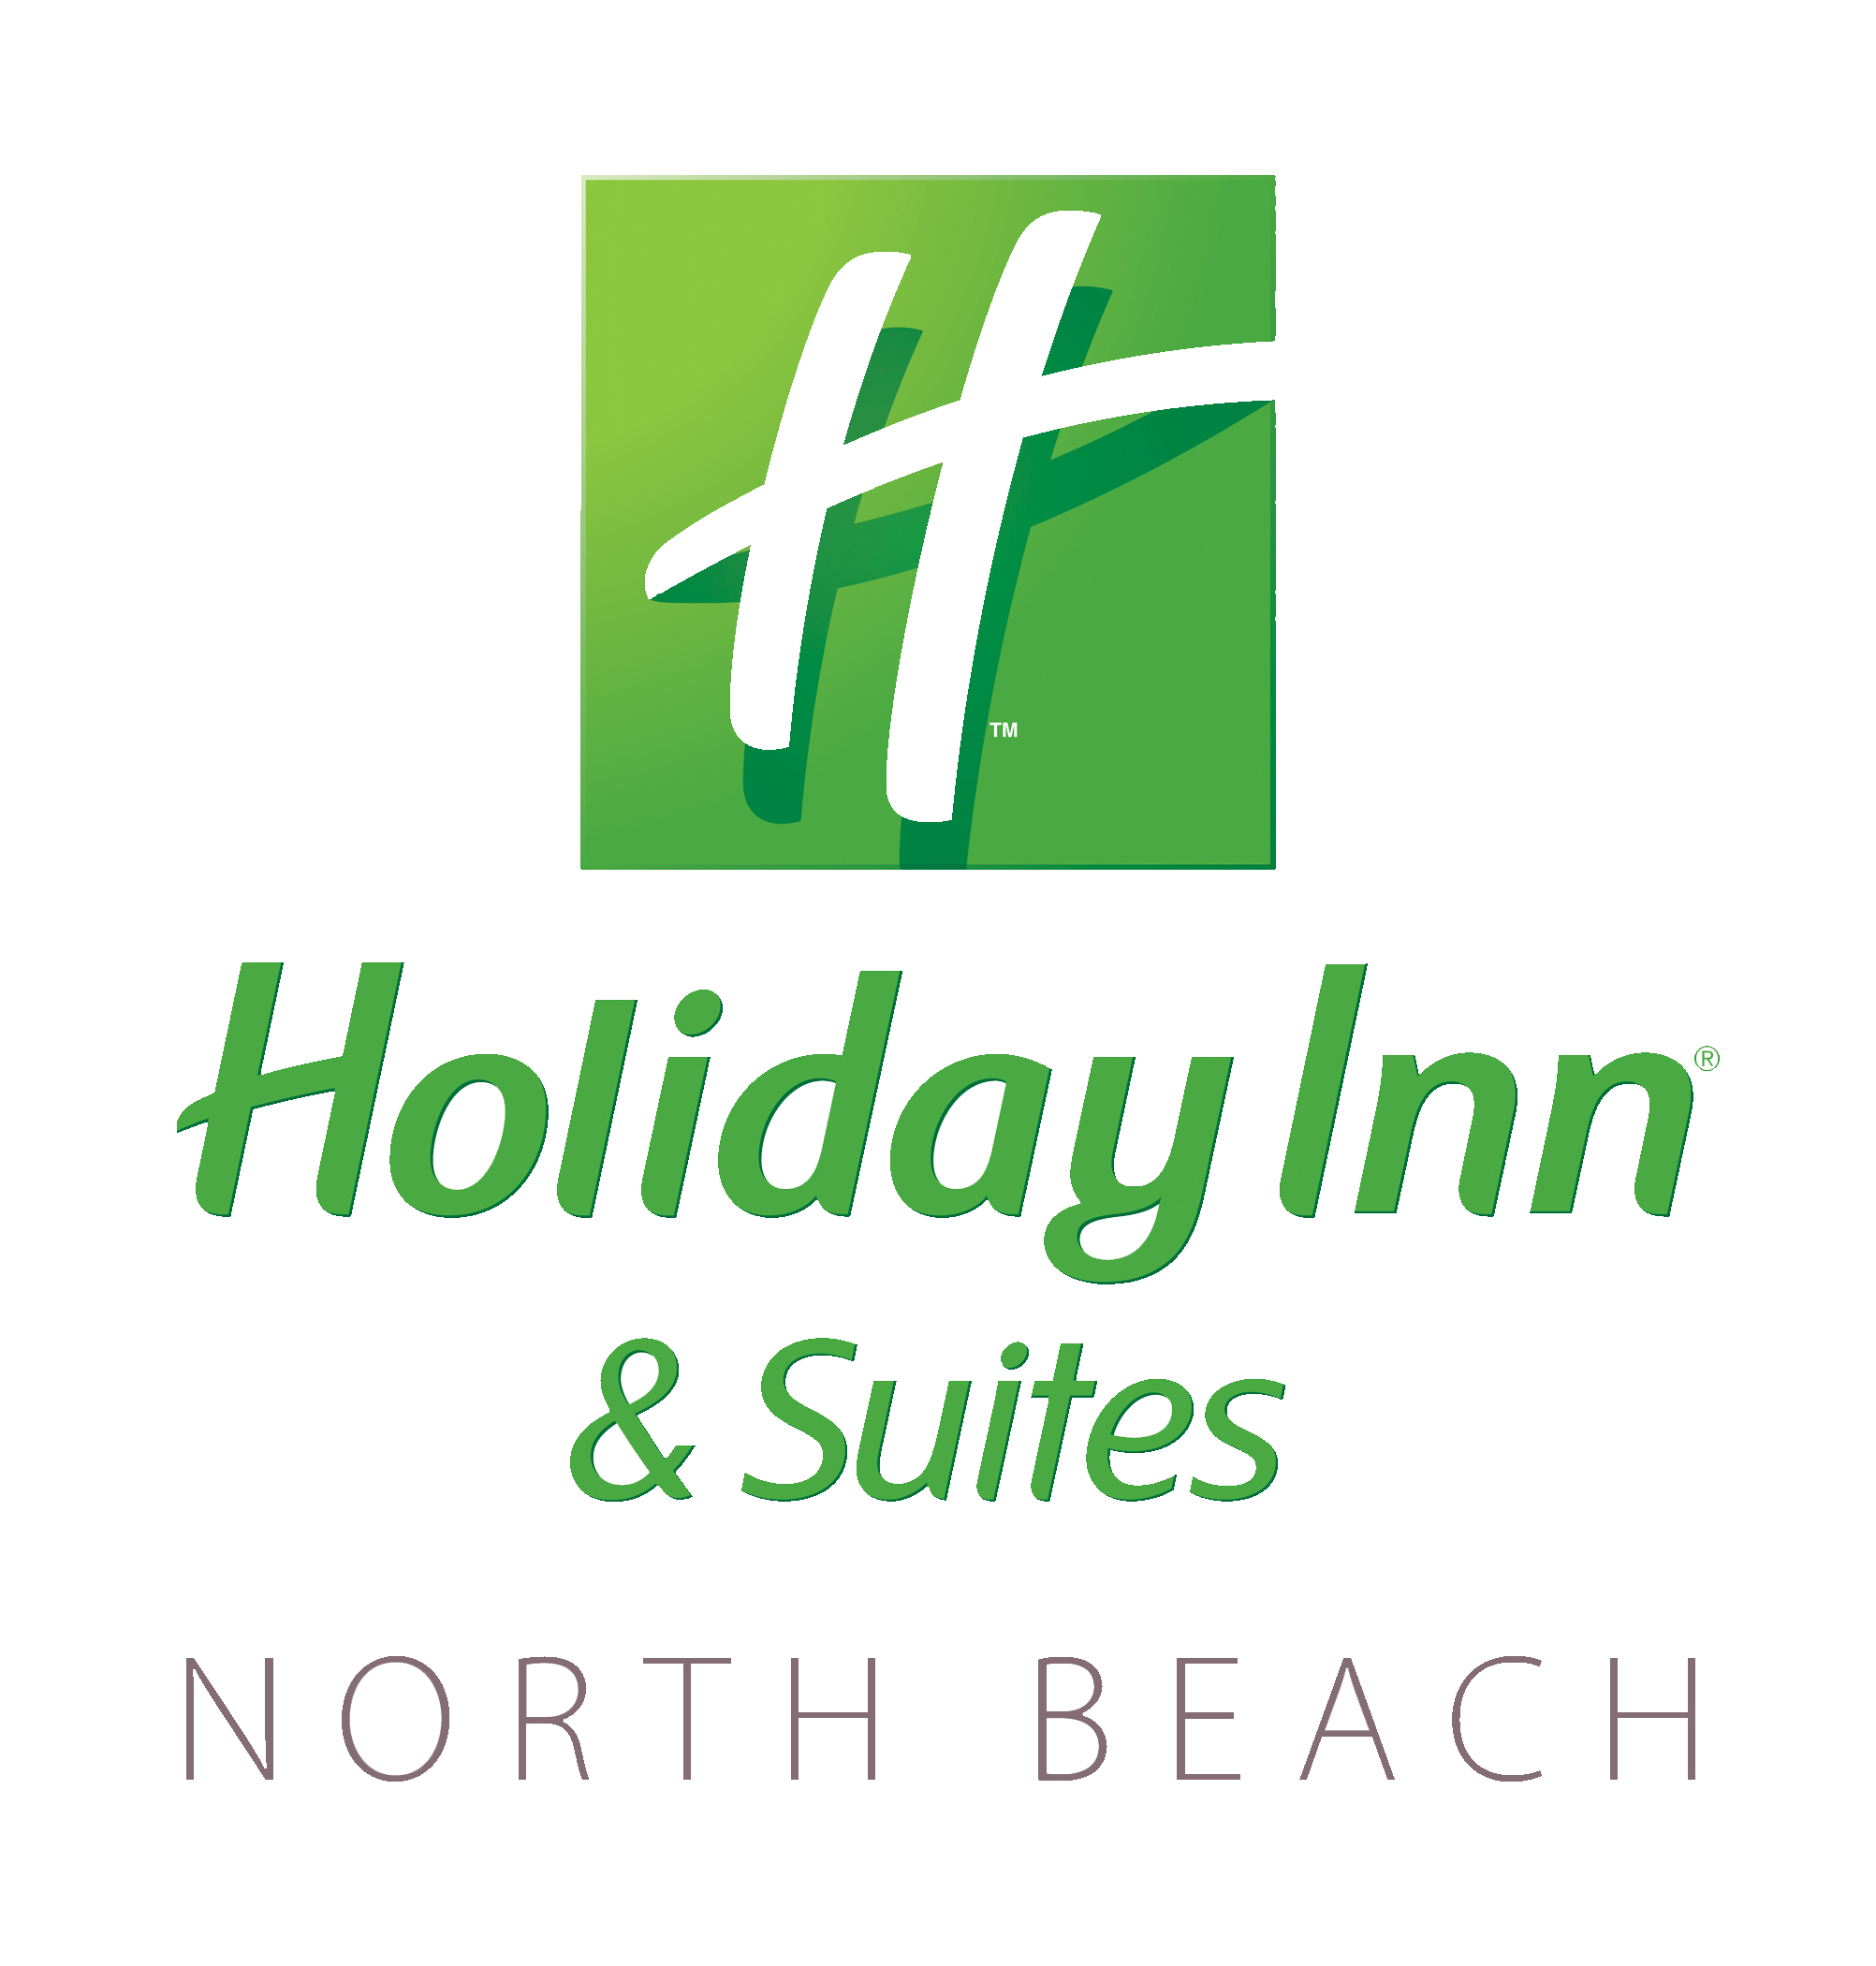 Holiday Inn and Suites North Beach Company Logo